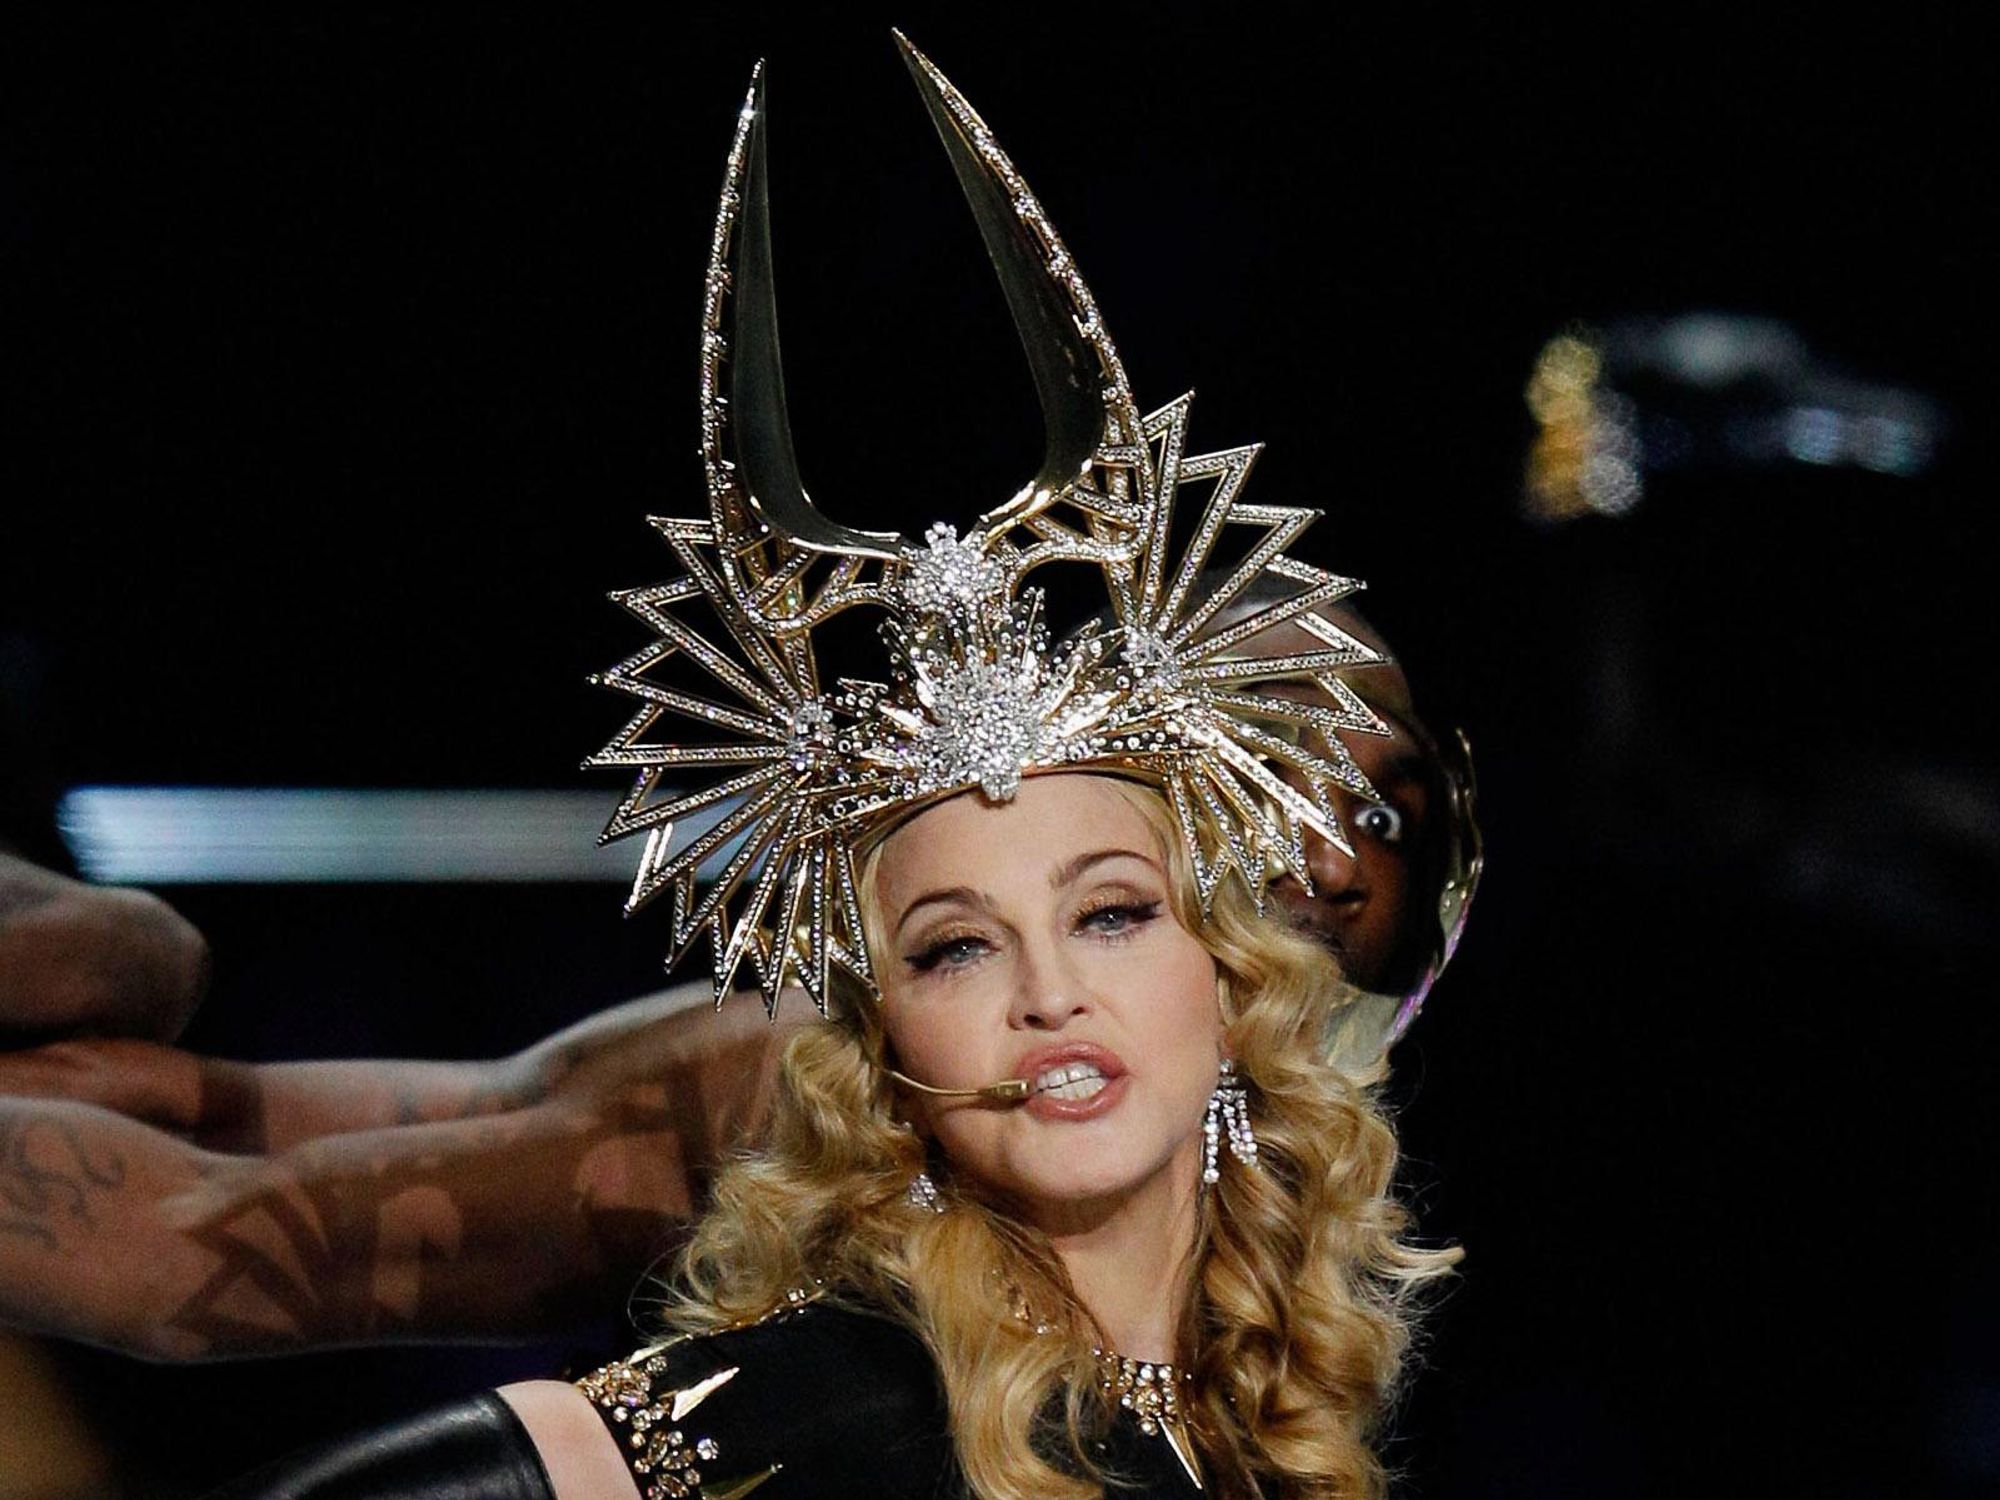 A Closer Look at Madonna's One-of-a-Kind Celebration Tour Wardrobe